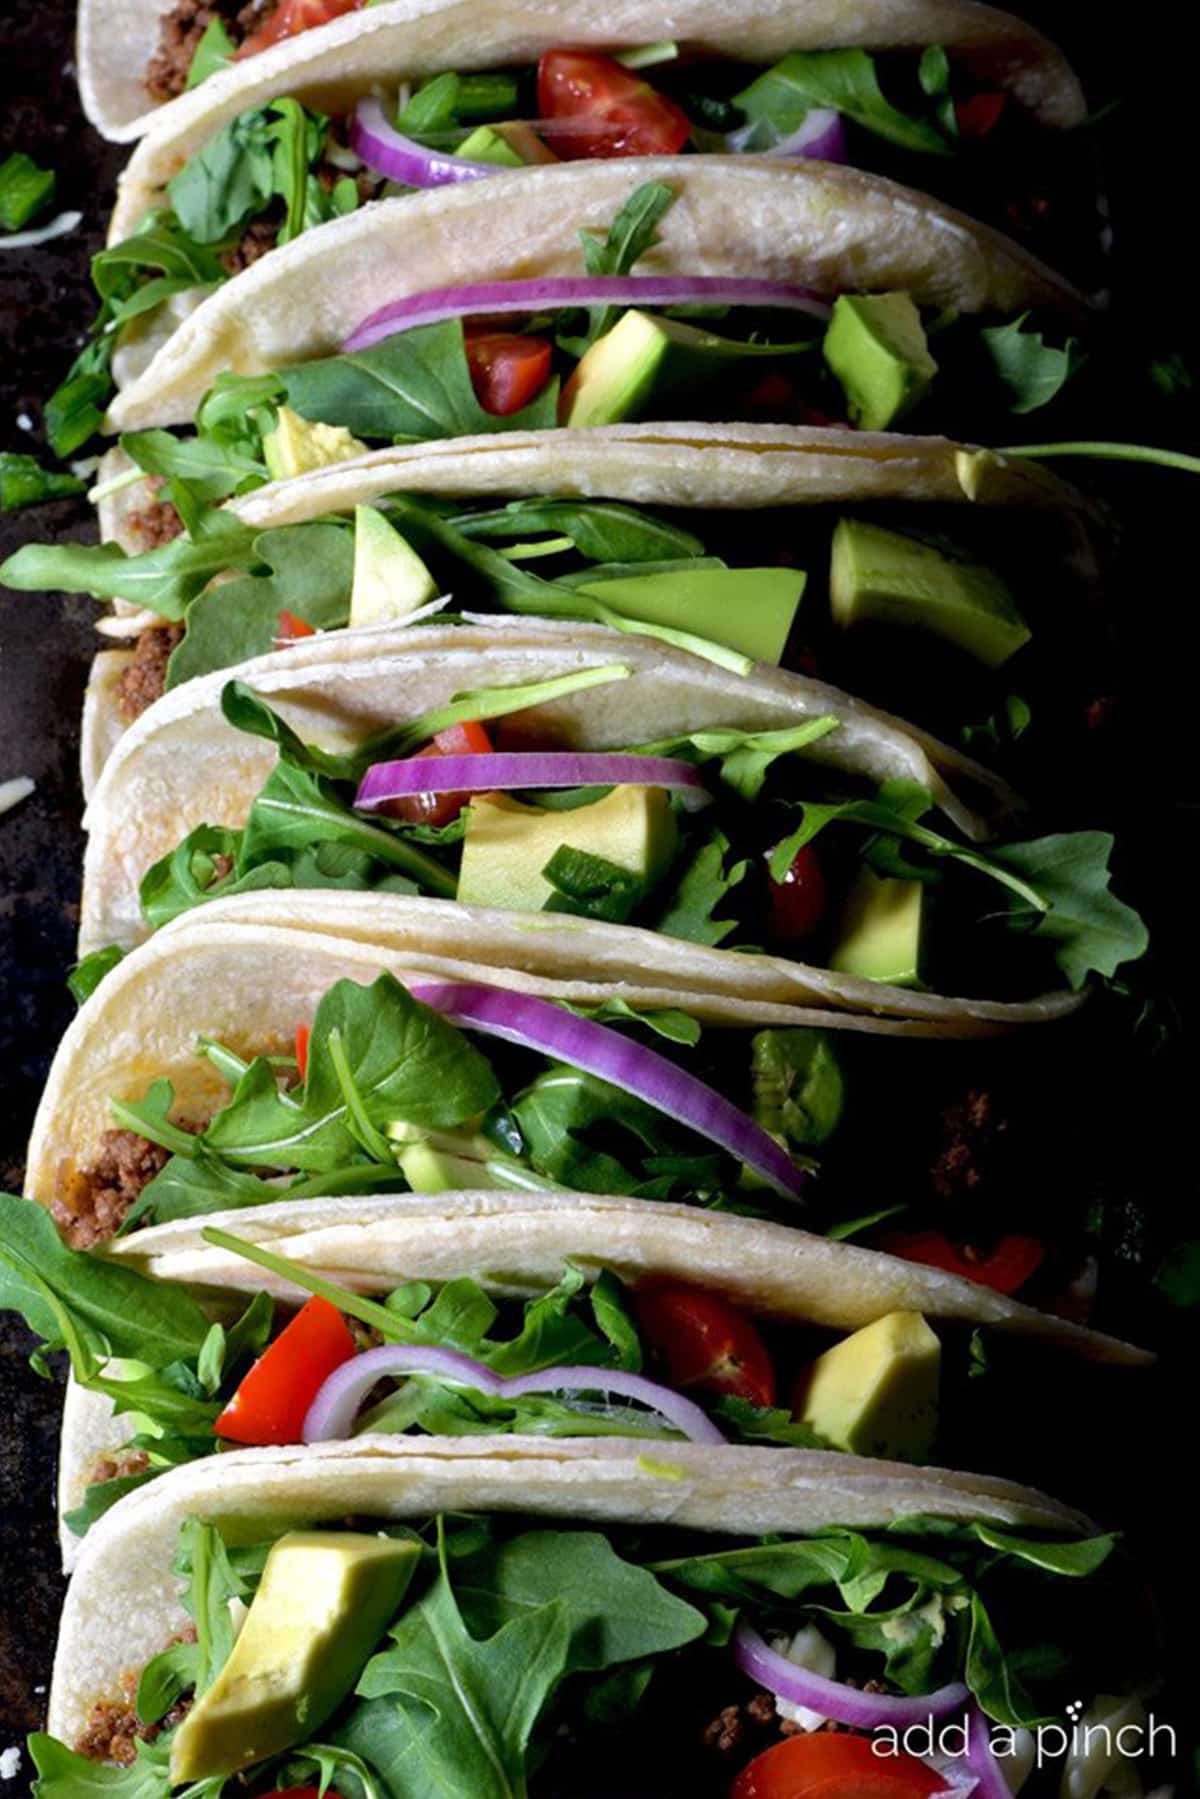 Row of soft beef soft shell tacos made with flour tortillas and filled with seasoned beef, lettuce, tomatoes, avocados and onions.